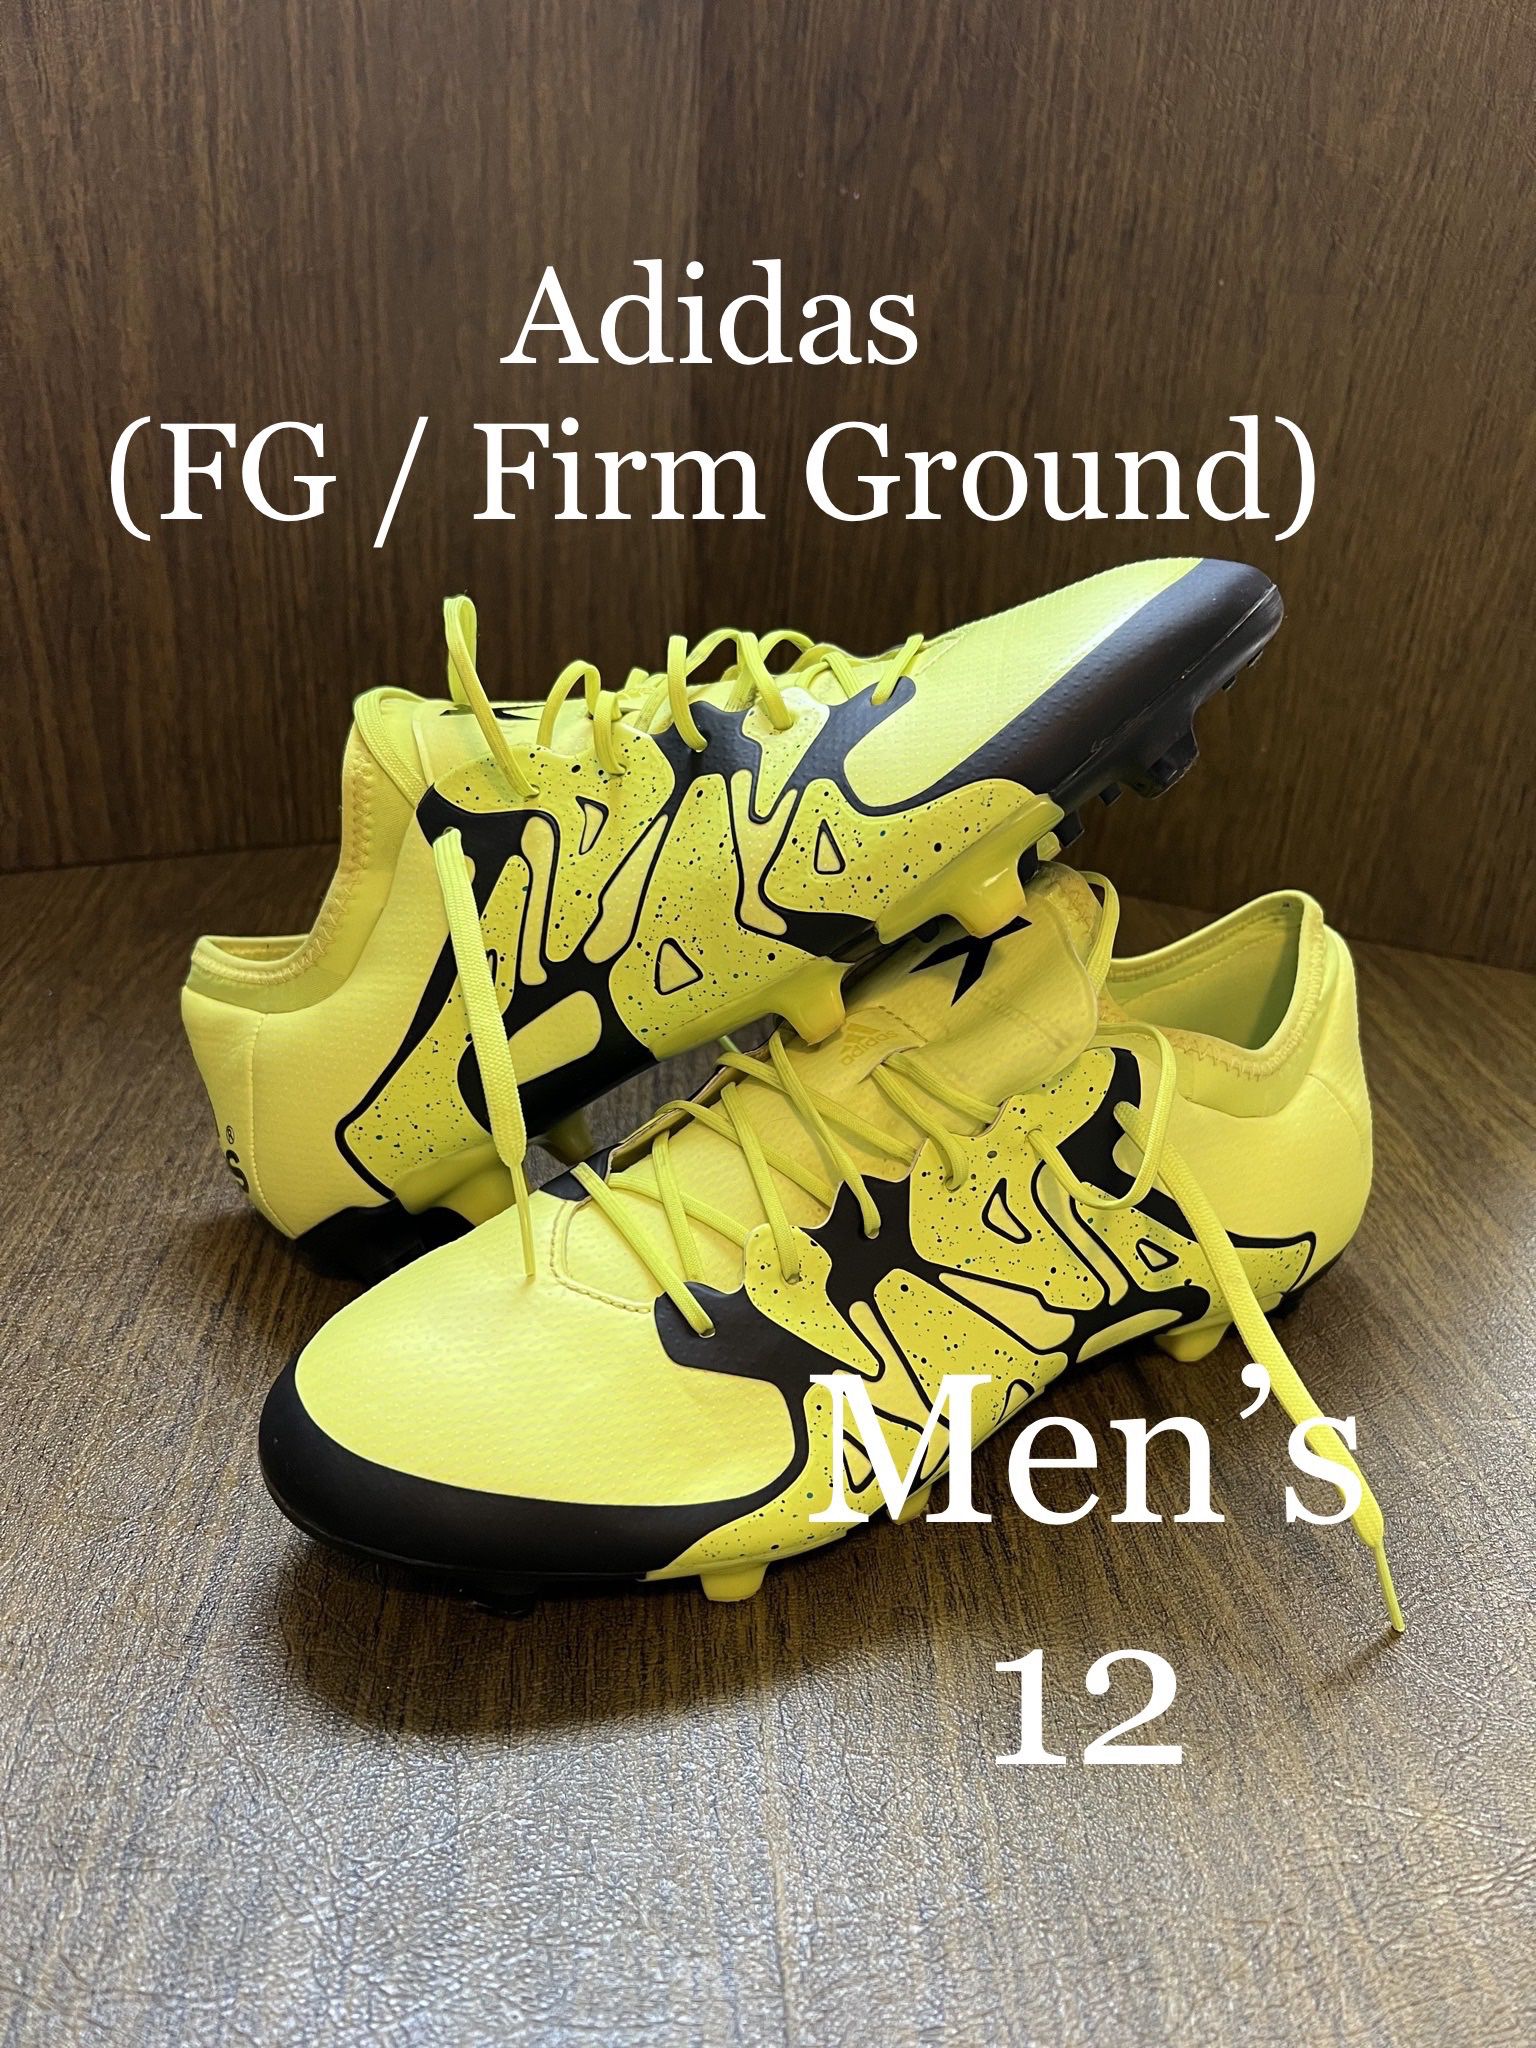 ADIDAS / 15.1 X / FG Firm Ground / Artificial Grass SOCCER Football Boots Cleats Shoes / Men’s 12 / Like New w/o Box!! / Neon & Black